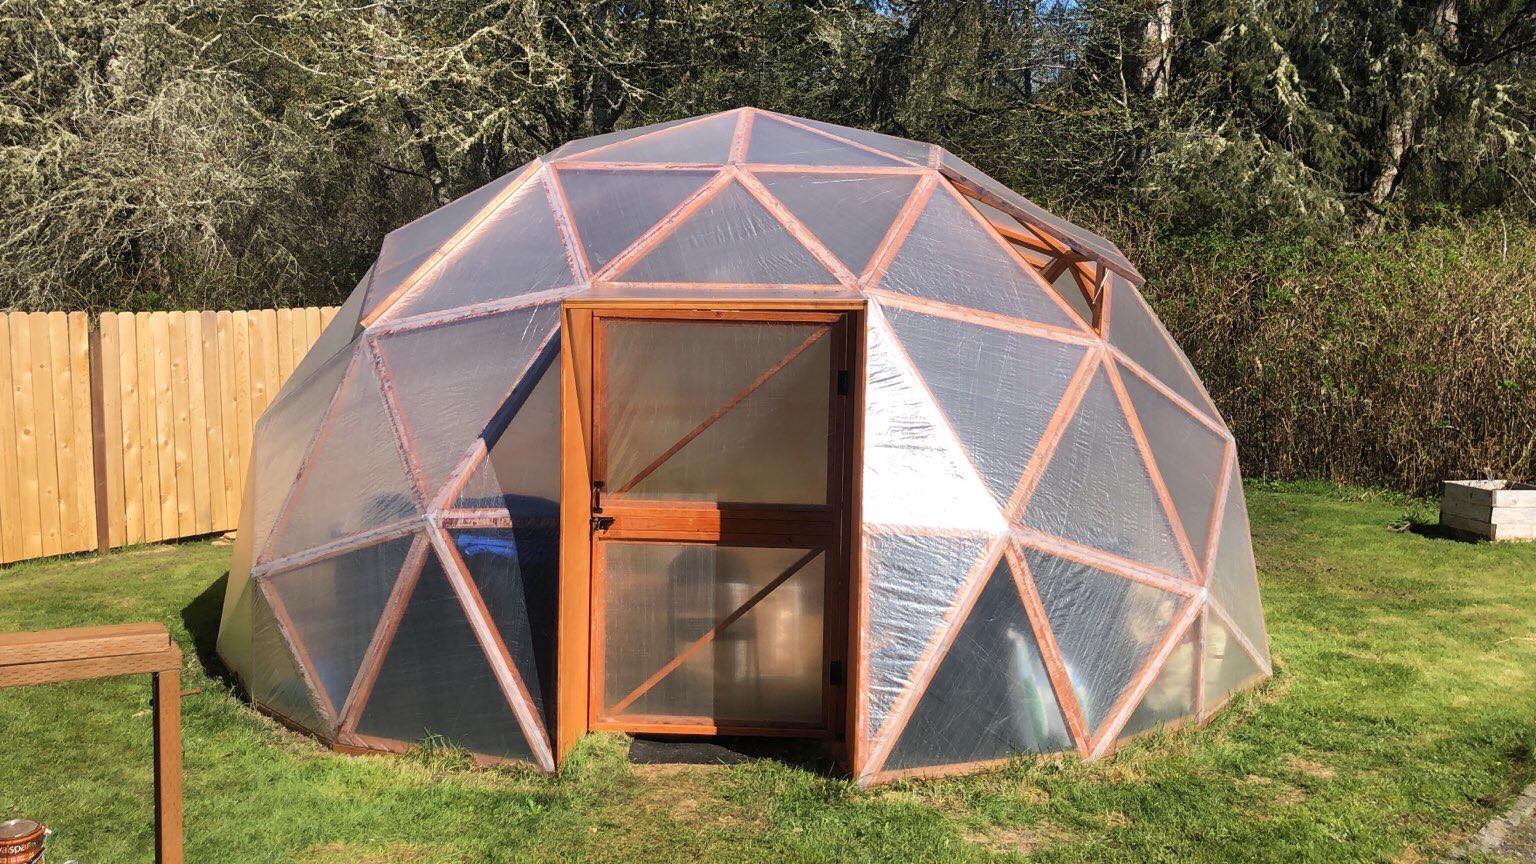 How To Build DIY Geodesic Dome Houses - Pro Explains Steps To Get One? 11